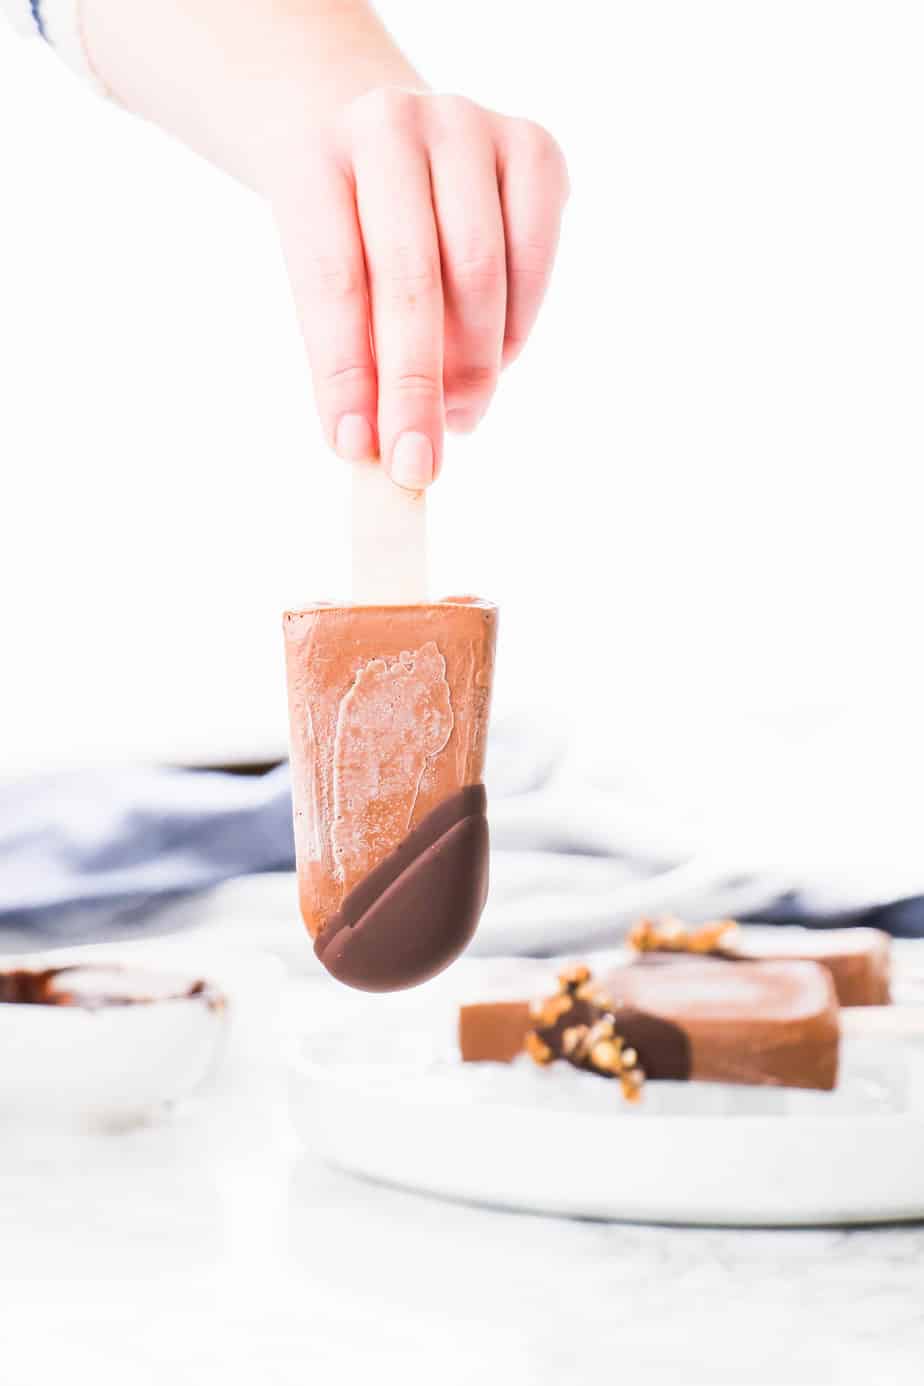 These Vegan Chocolate Protein Popsicles make the best on the go breakfast or the ultimate summer dessert. Made with vegan protein, coconut milk and topped off with dark chocolate ganache and crunchy granola.